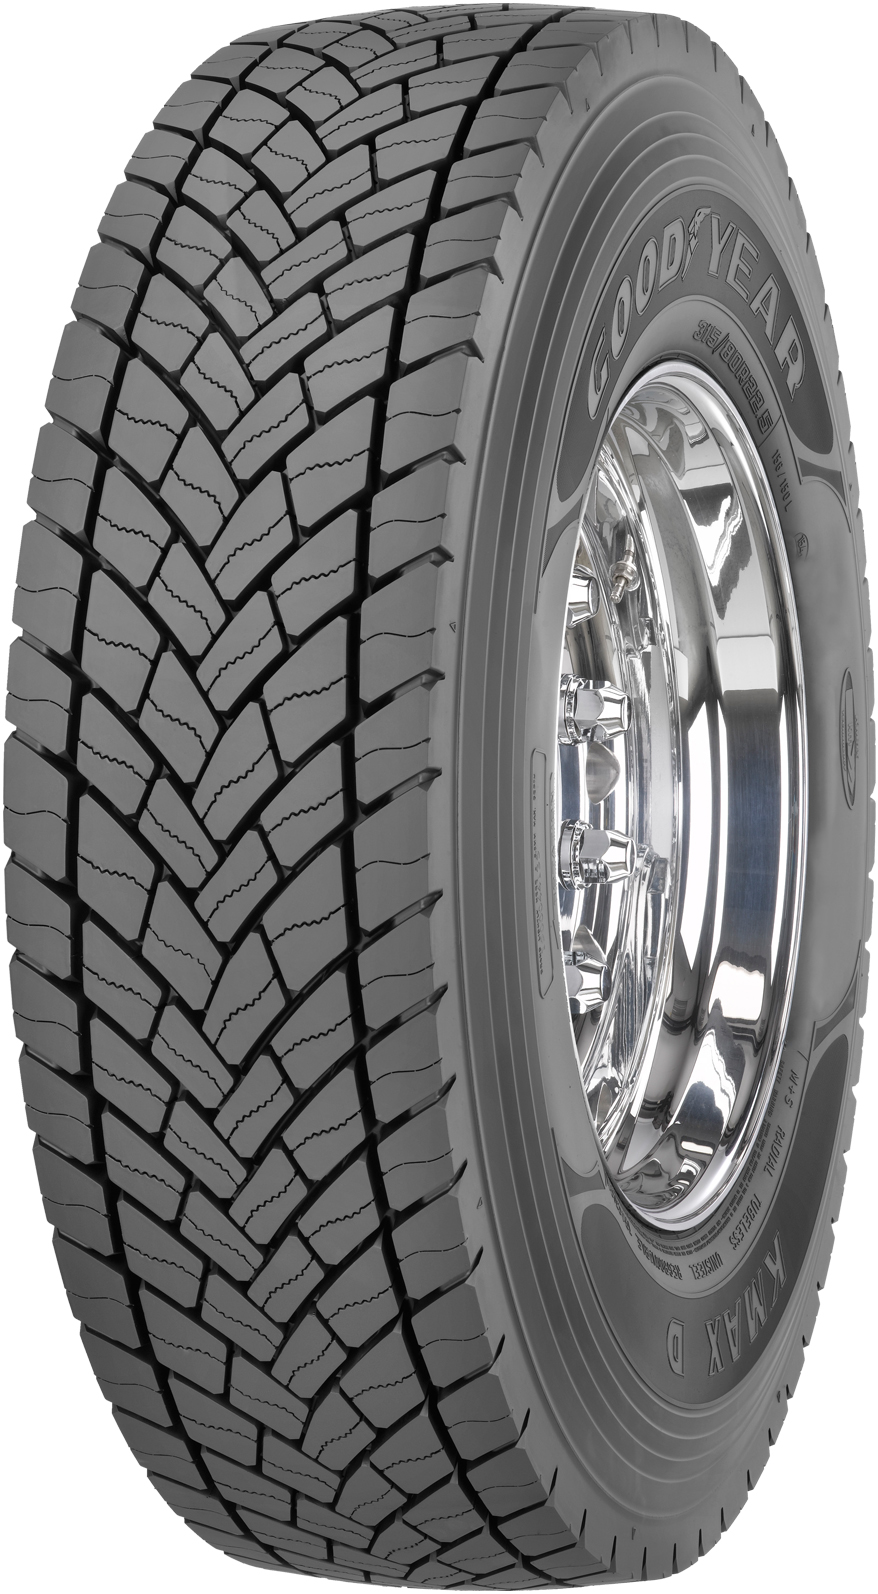 product_type-heavy_tires GOODYEAR KMAX D 16 TL 245/70 R19.5 136M